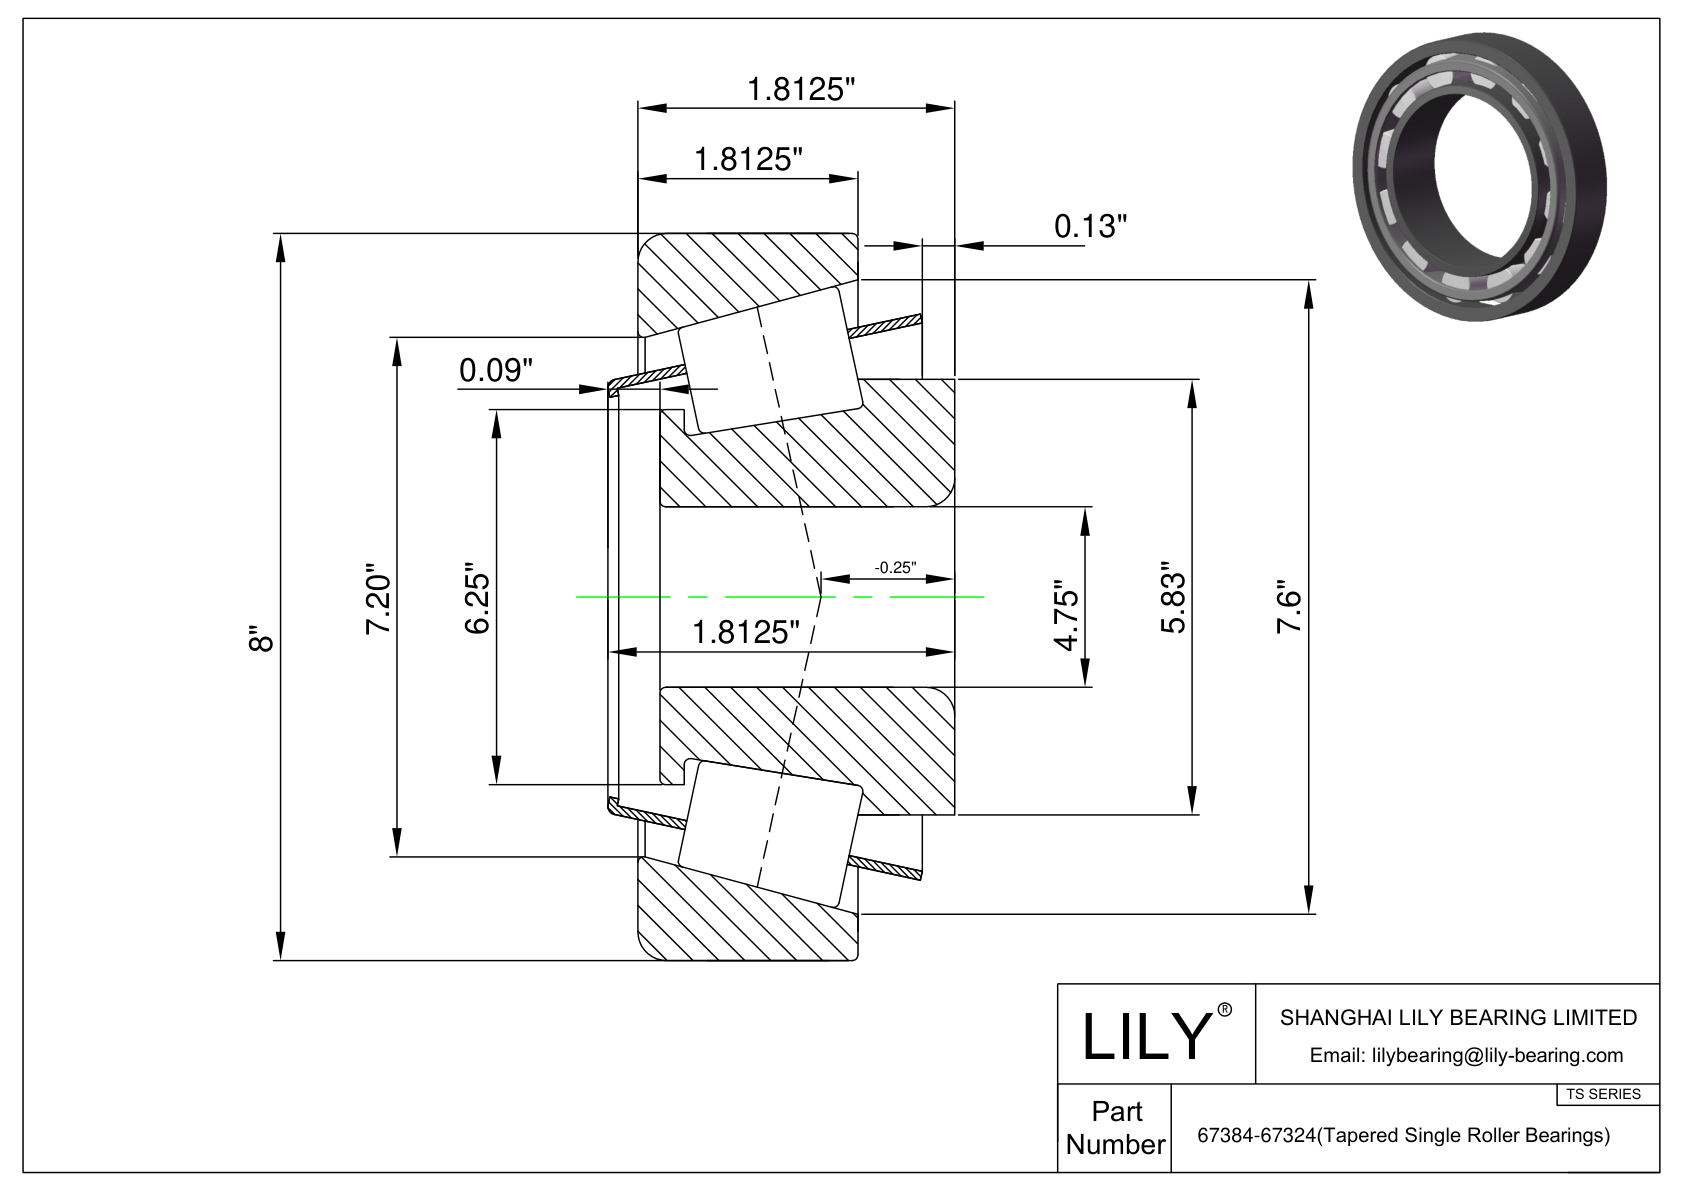 67384-67324 TS (Tapered Single Roller Bearings) (Imperial) cad drawing